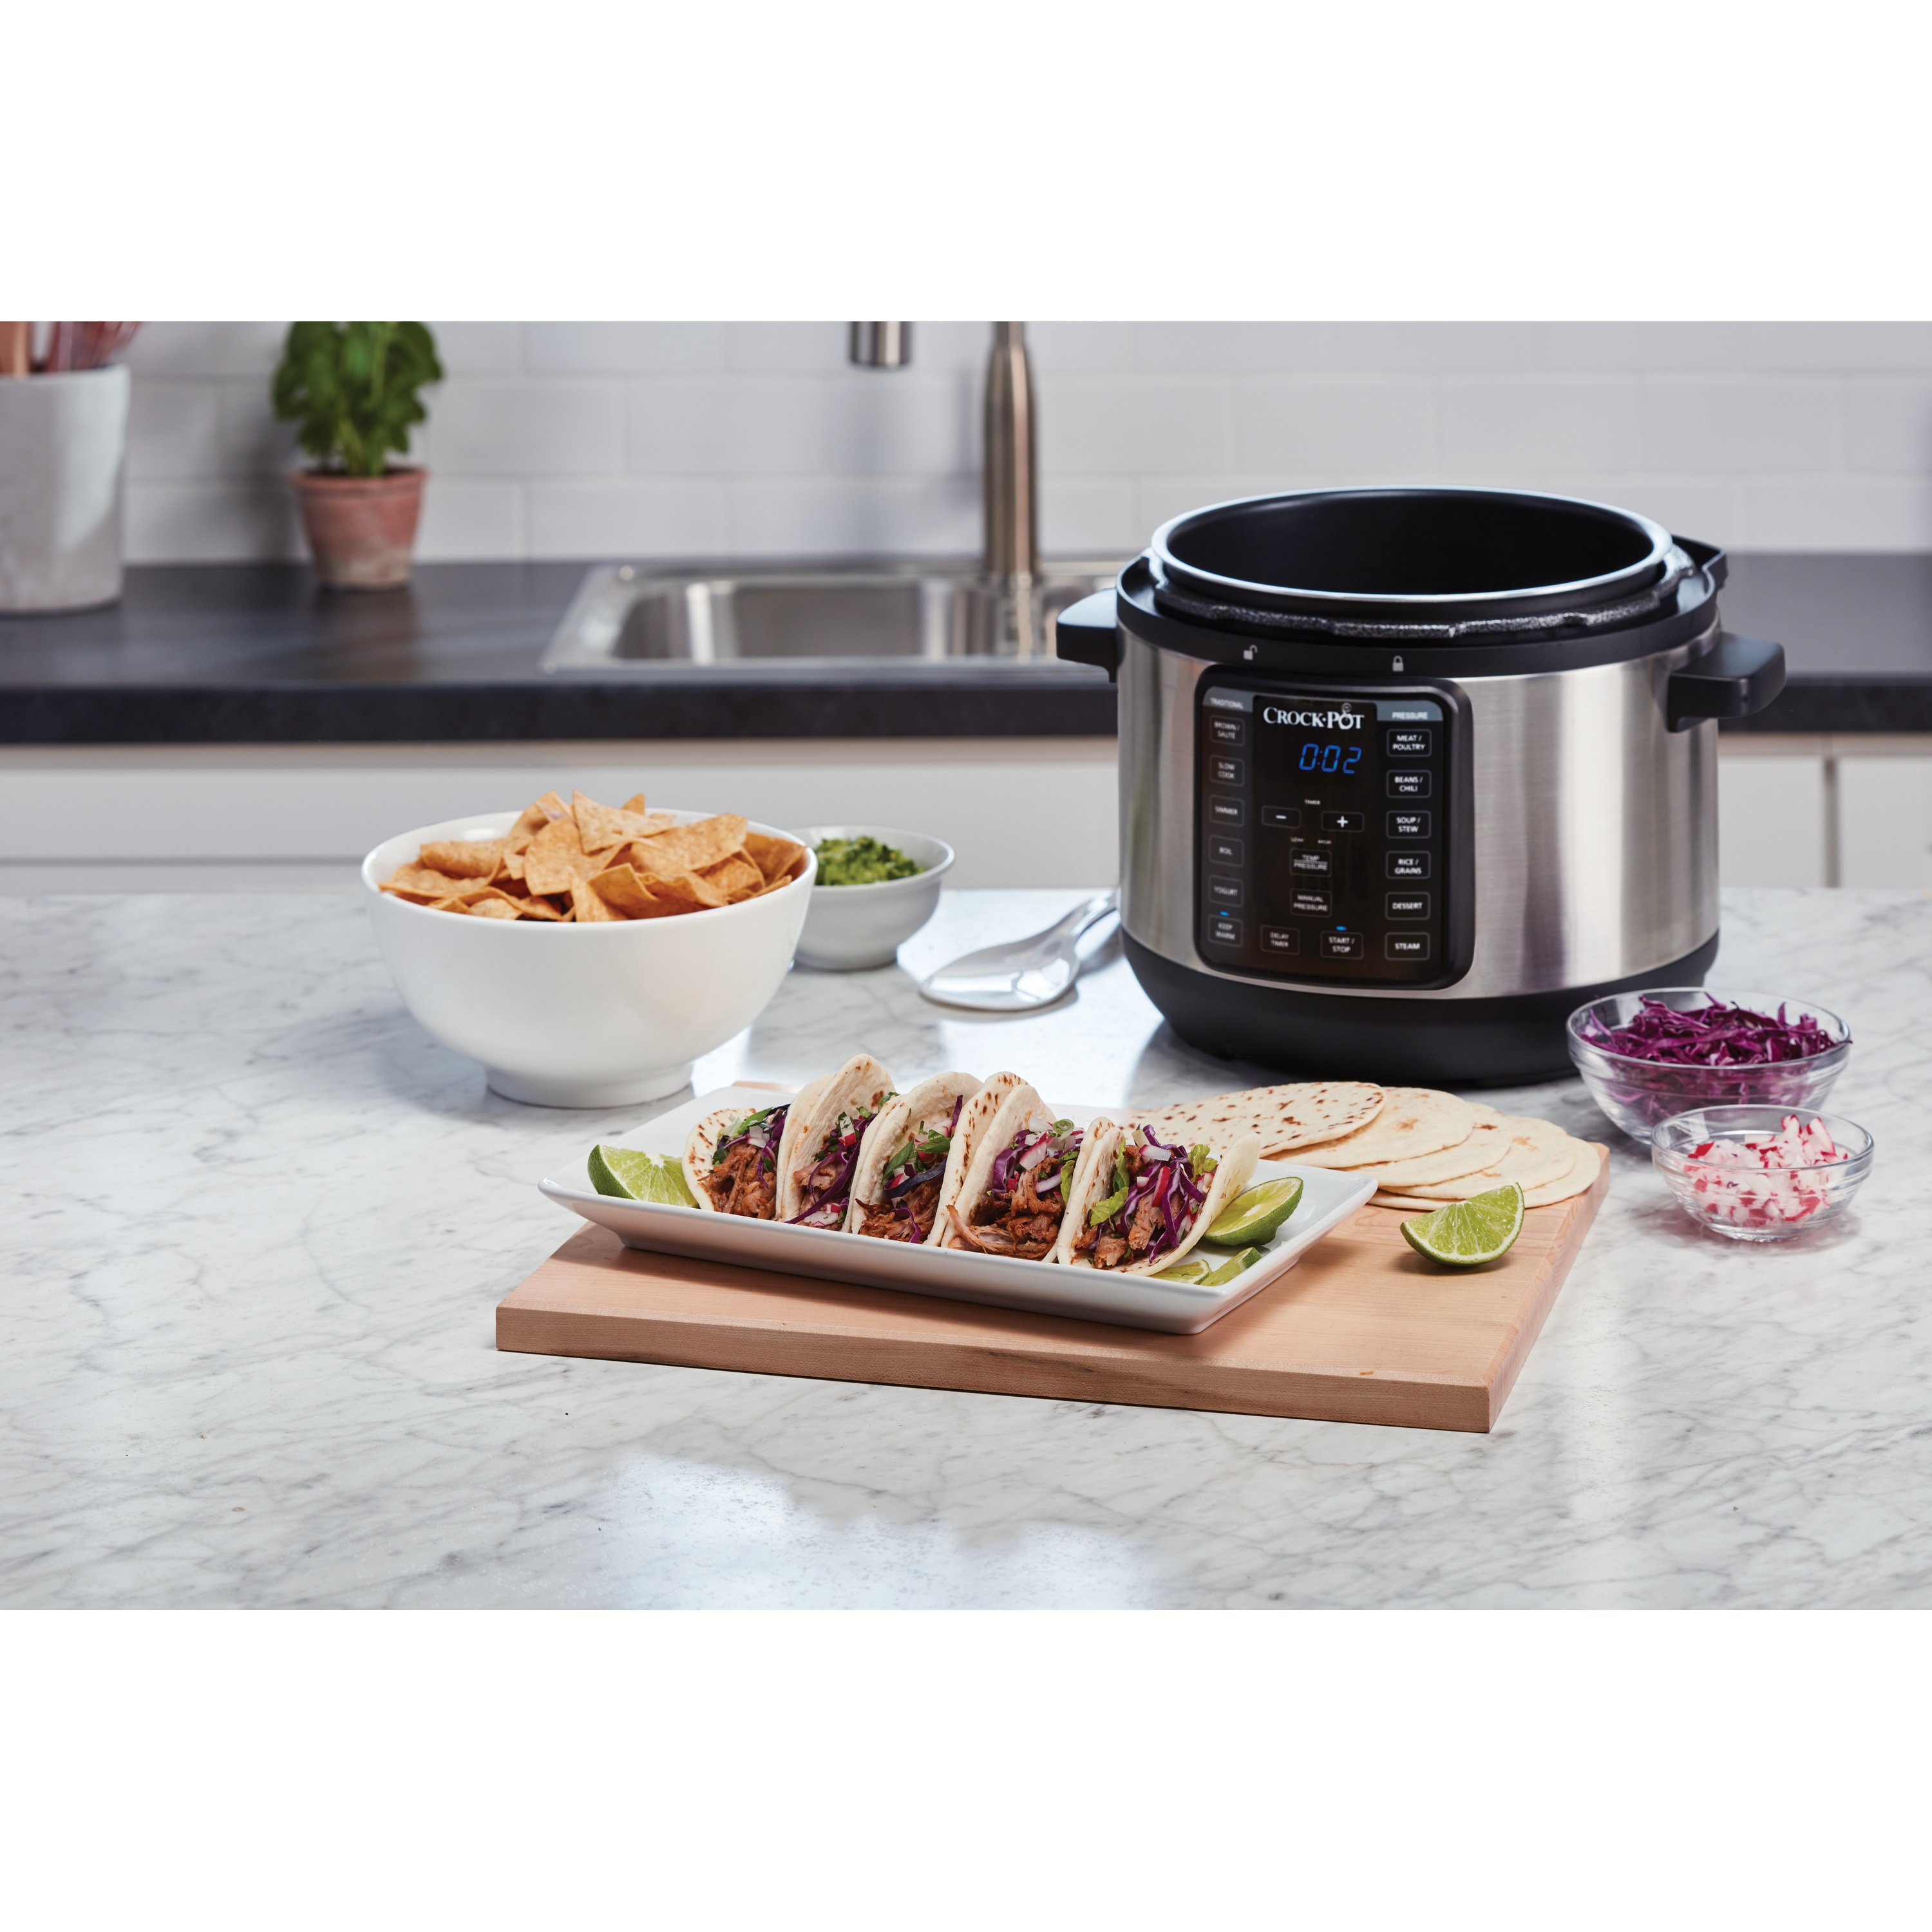 Crock-Pot 4 Quart 8-in-1 Multi-Use Express Crock Programmable Slow Cooker, Pressure Cooker, Sauté, and Steamer in Silver - image 5 of 9